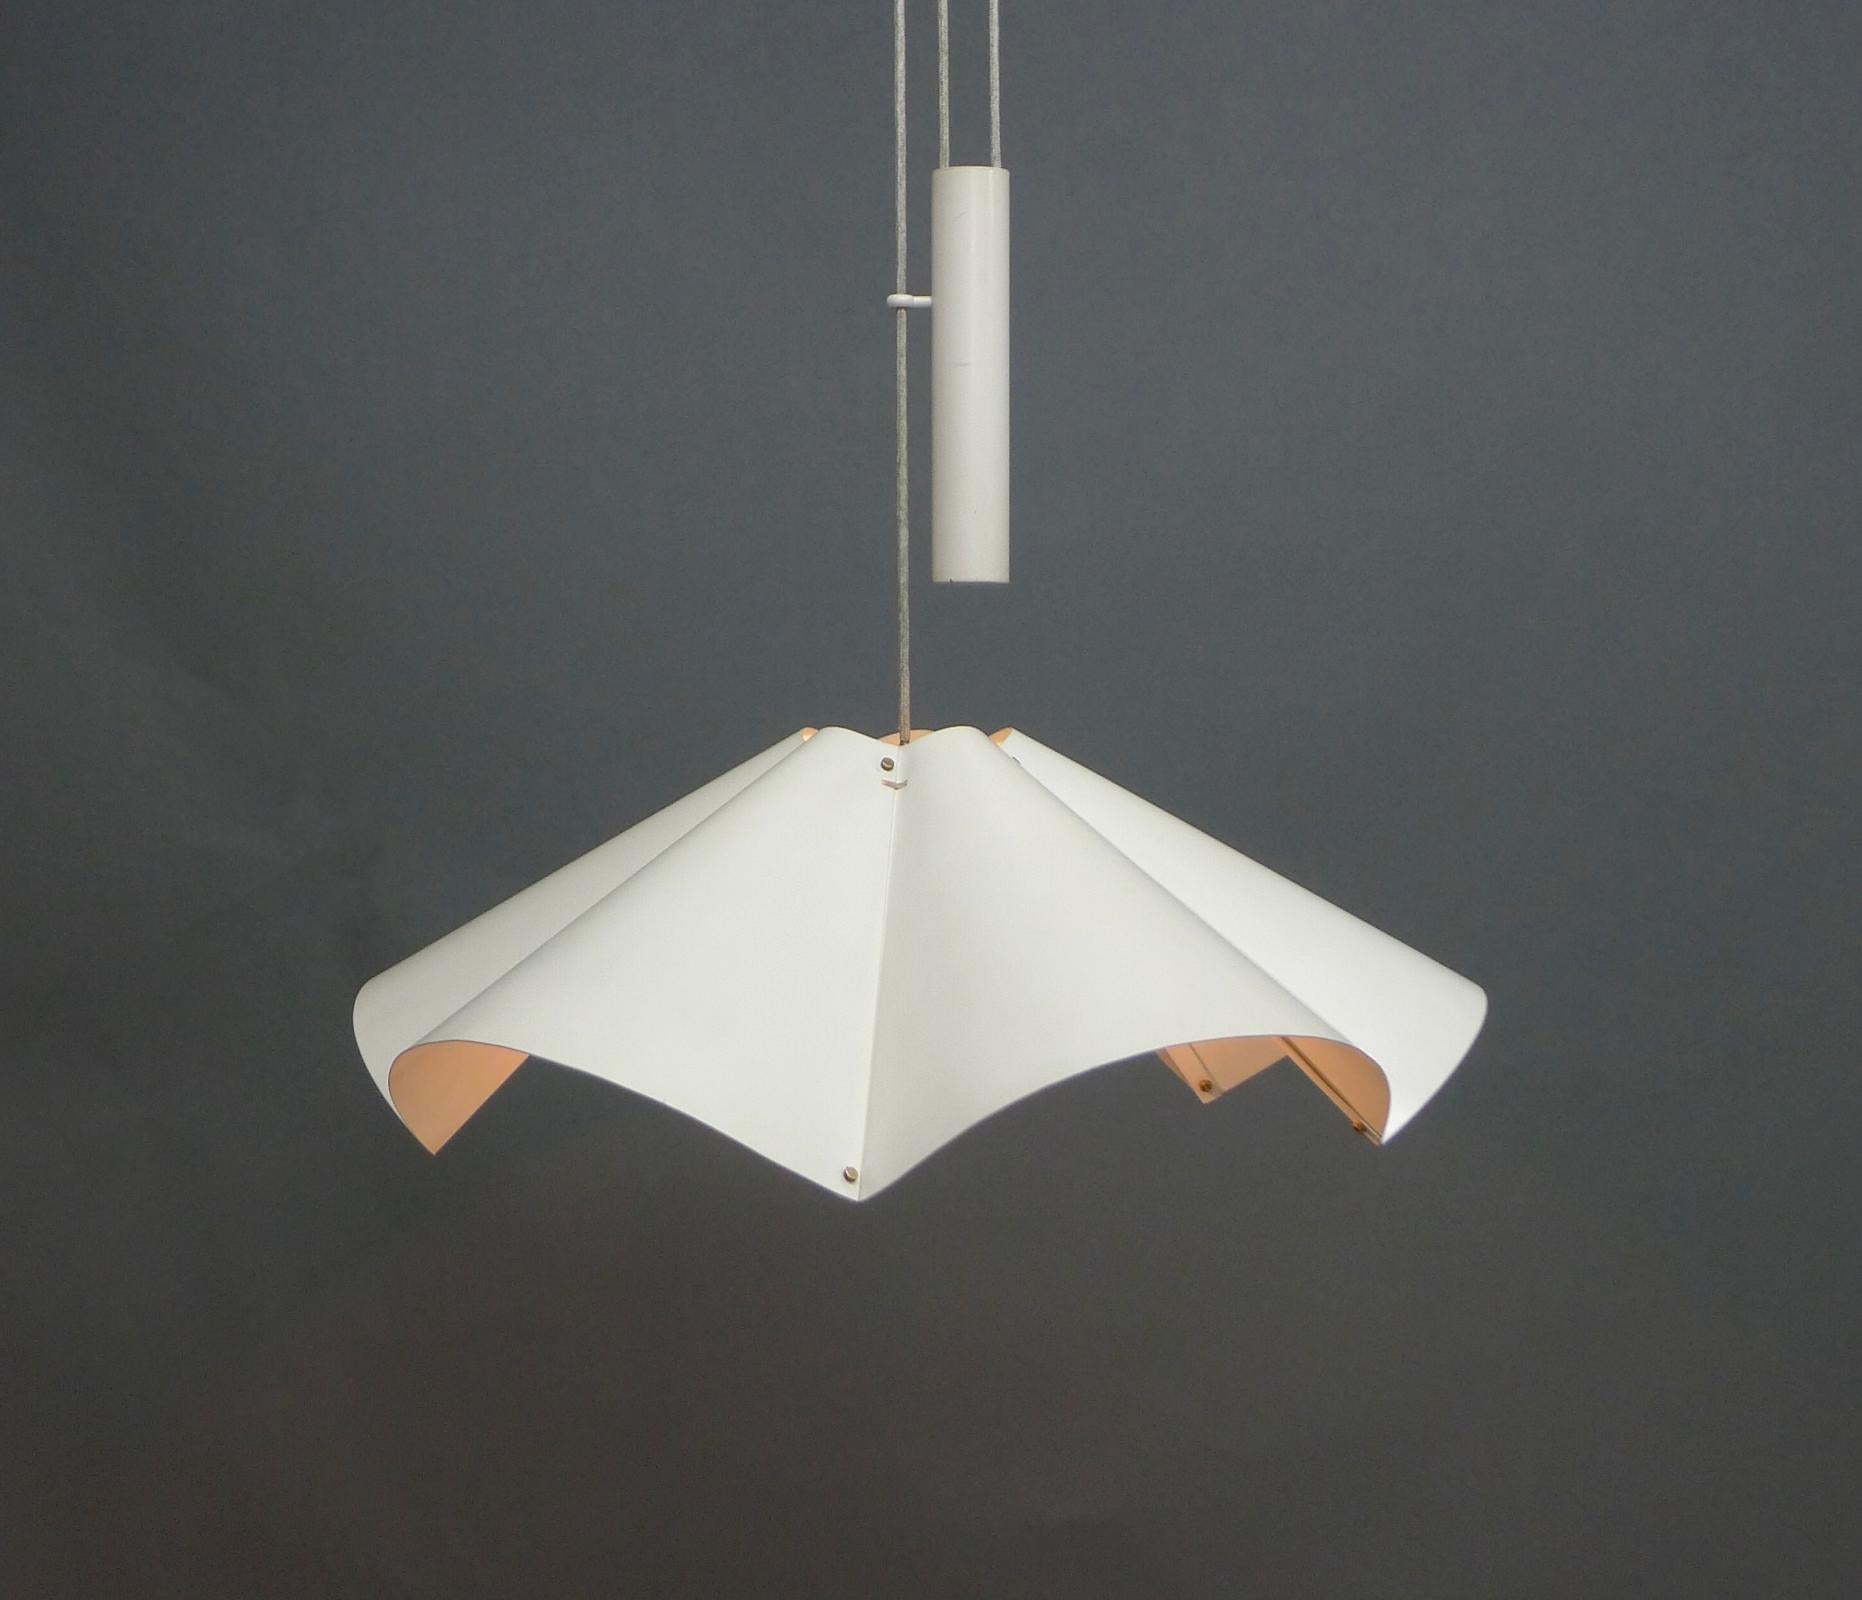 Gino Sarfatti for Arteluce, Rise and Fall Pendant Light, Model 2134, 1950s For Sale 5